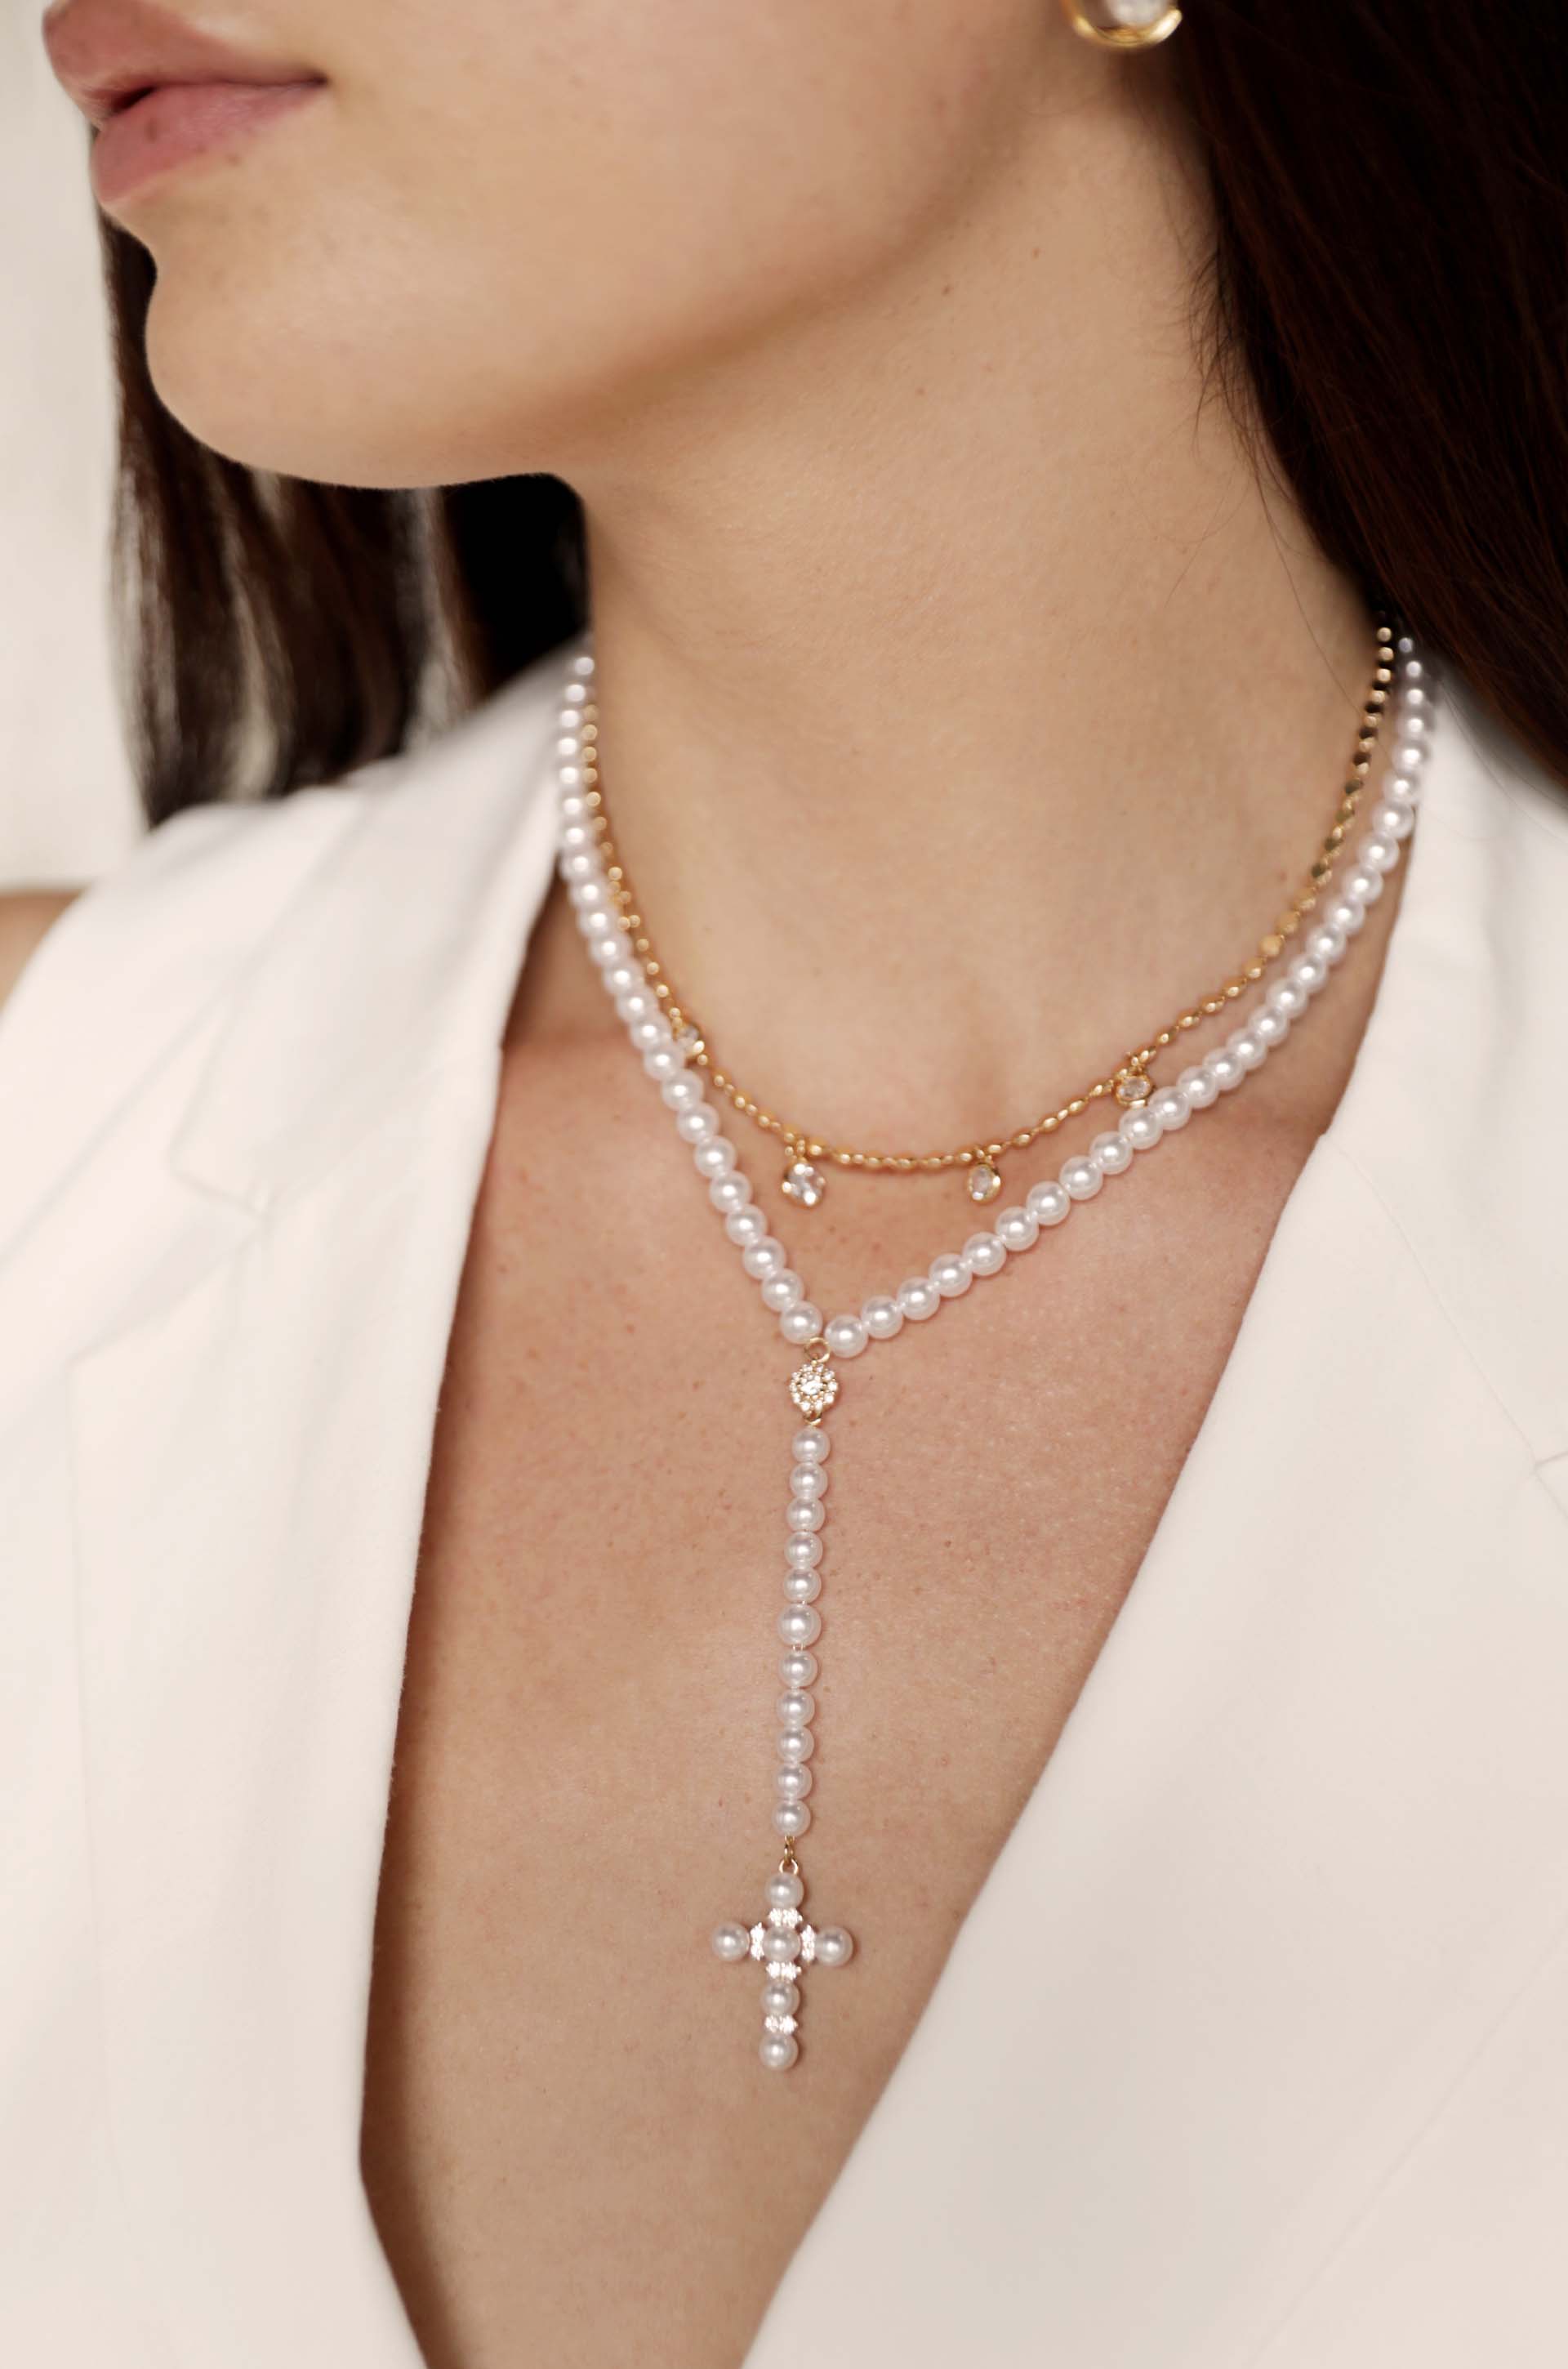 Double Pearl Cross Pearl Chain With Pendant Set Hip Fashion Neckalces With  8 10mm Mix Pearls NNS1315 From Shoppufashion, $23.66 | DHgate.Com